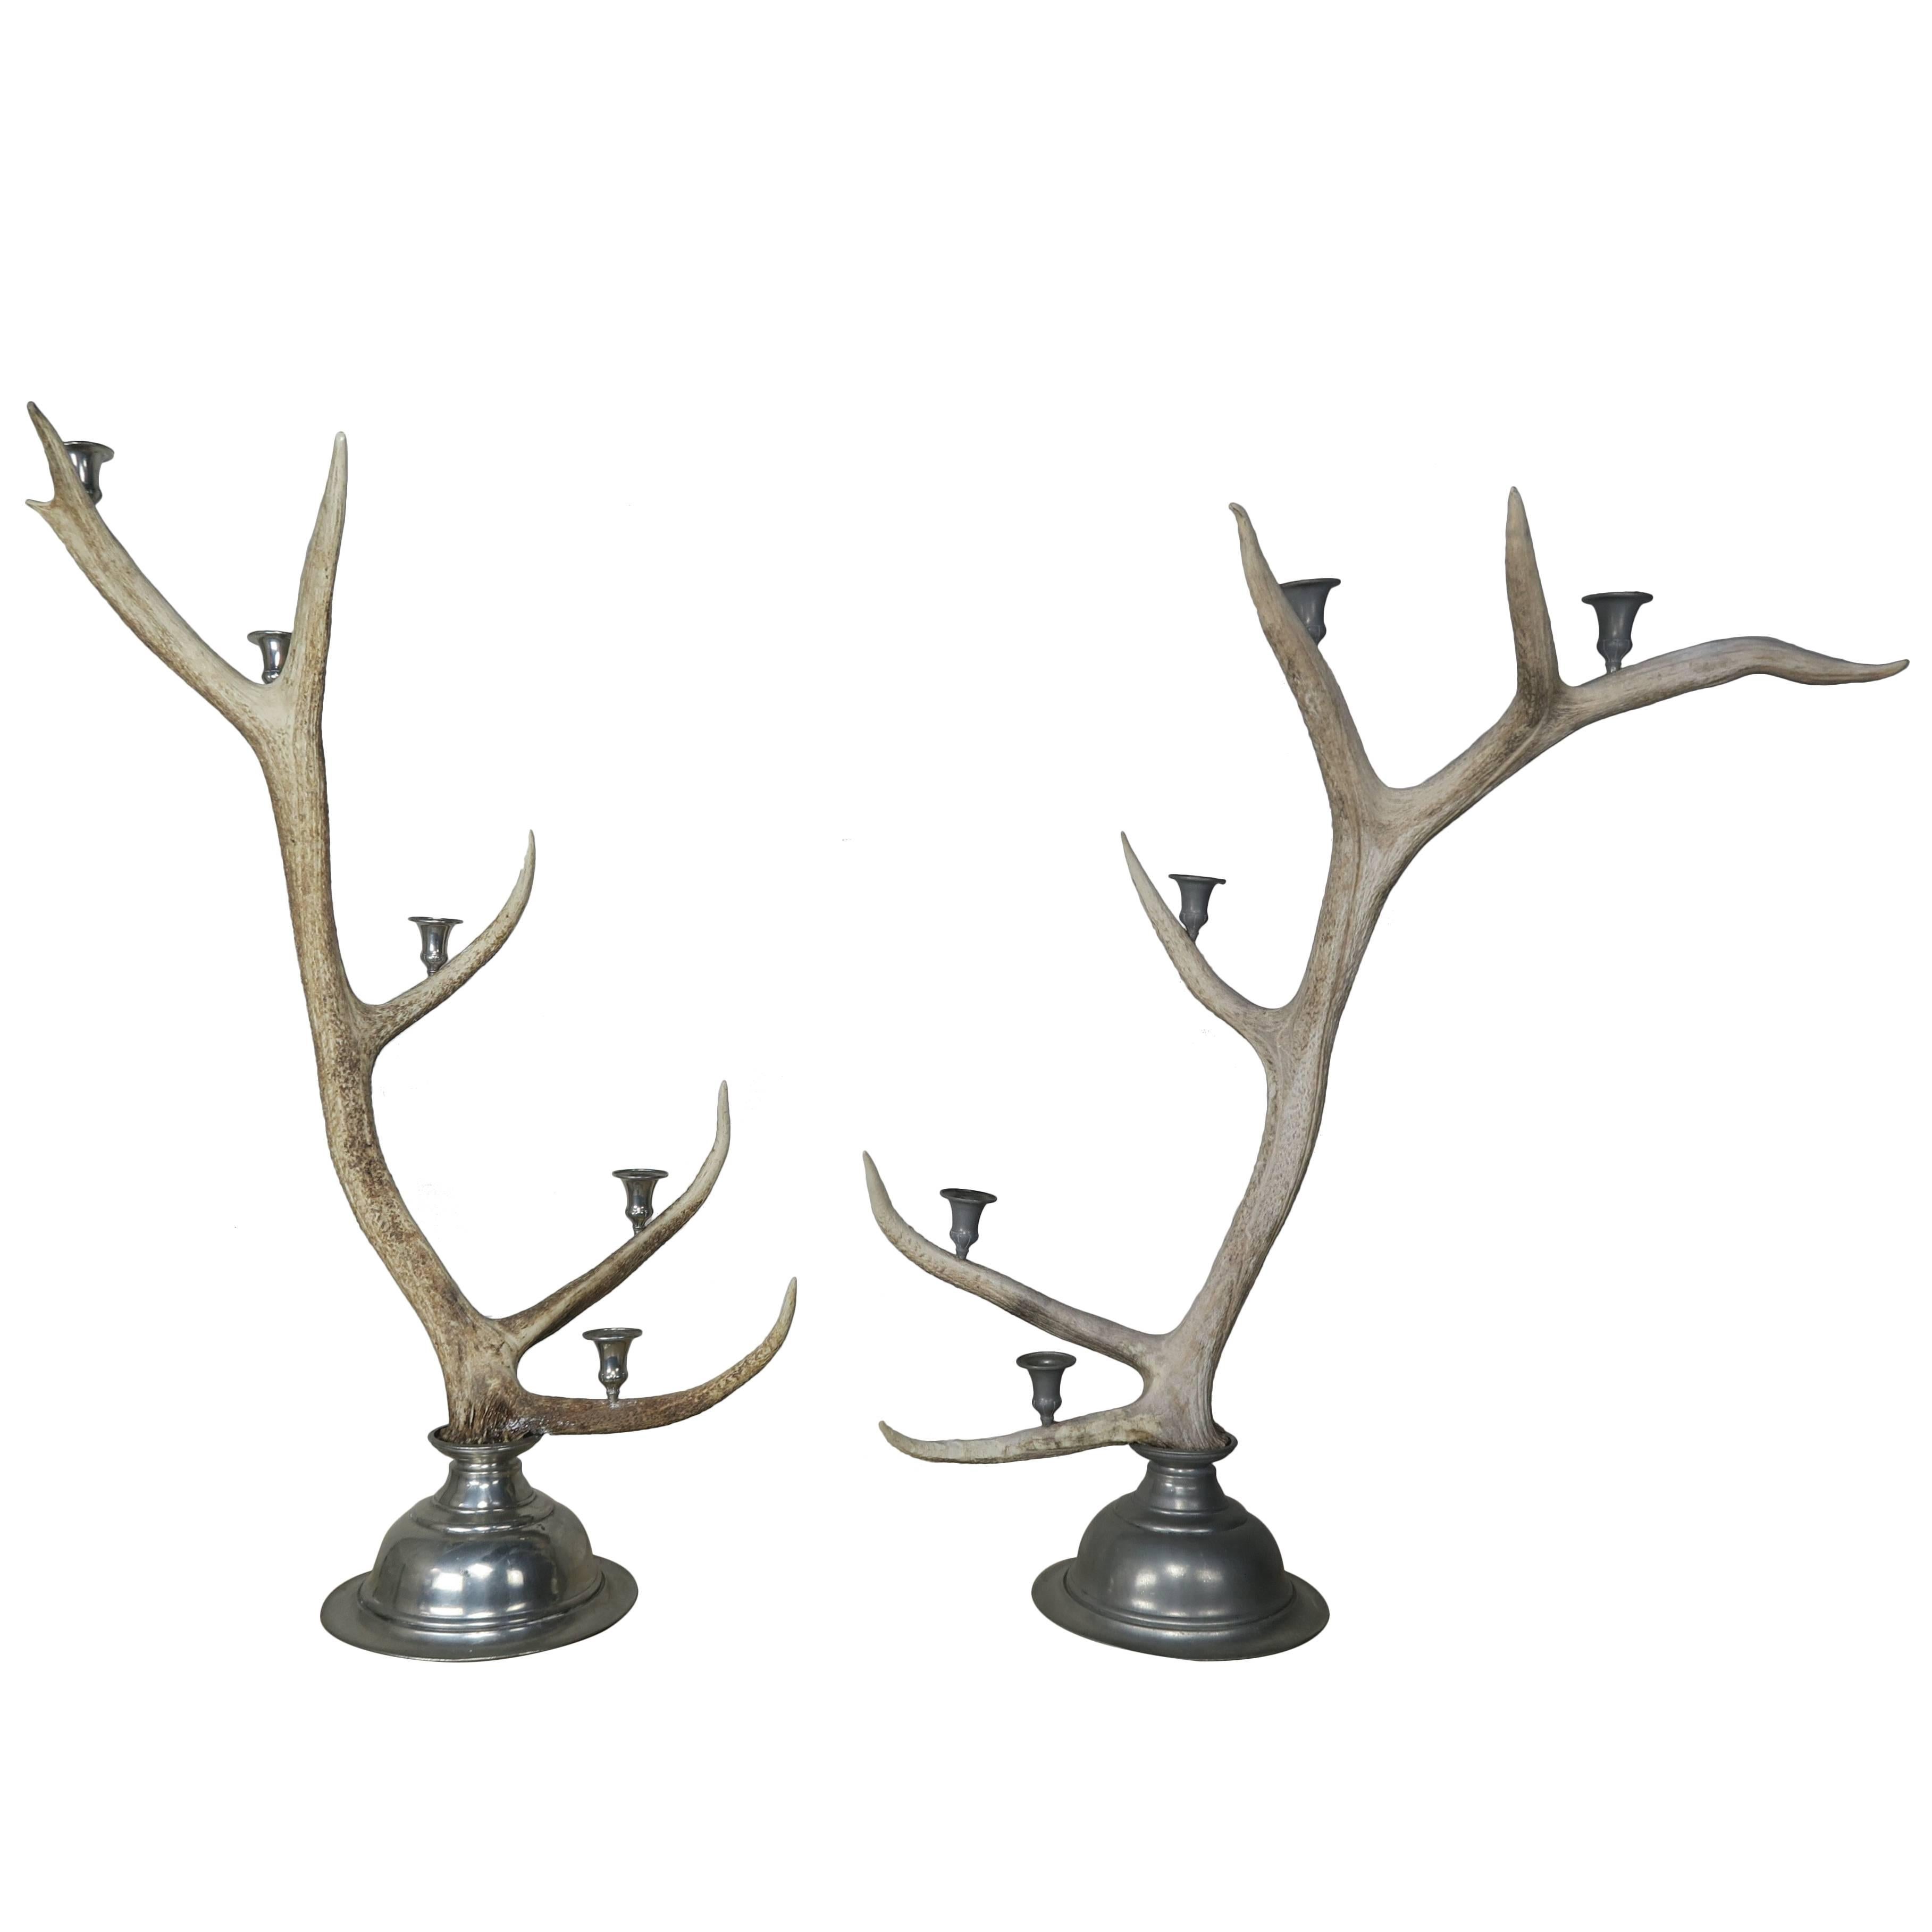 Pair of English Antler and Pewter Candleholders, circa 1900